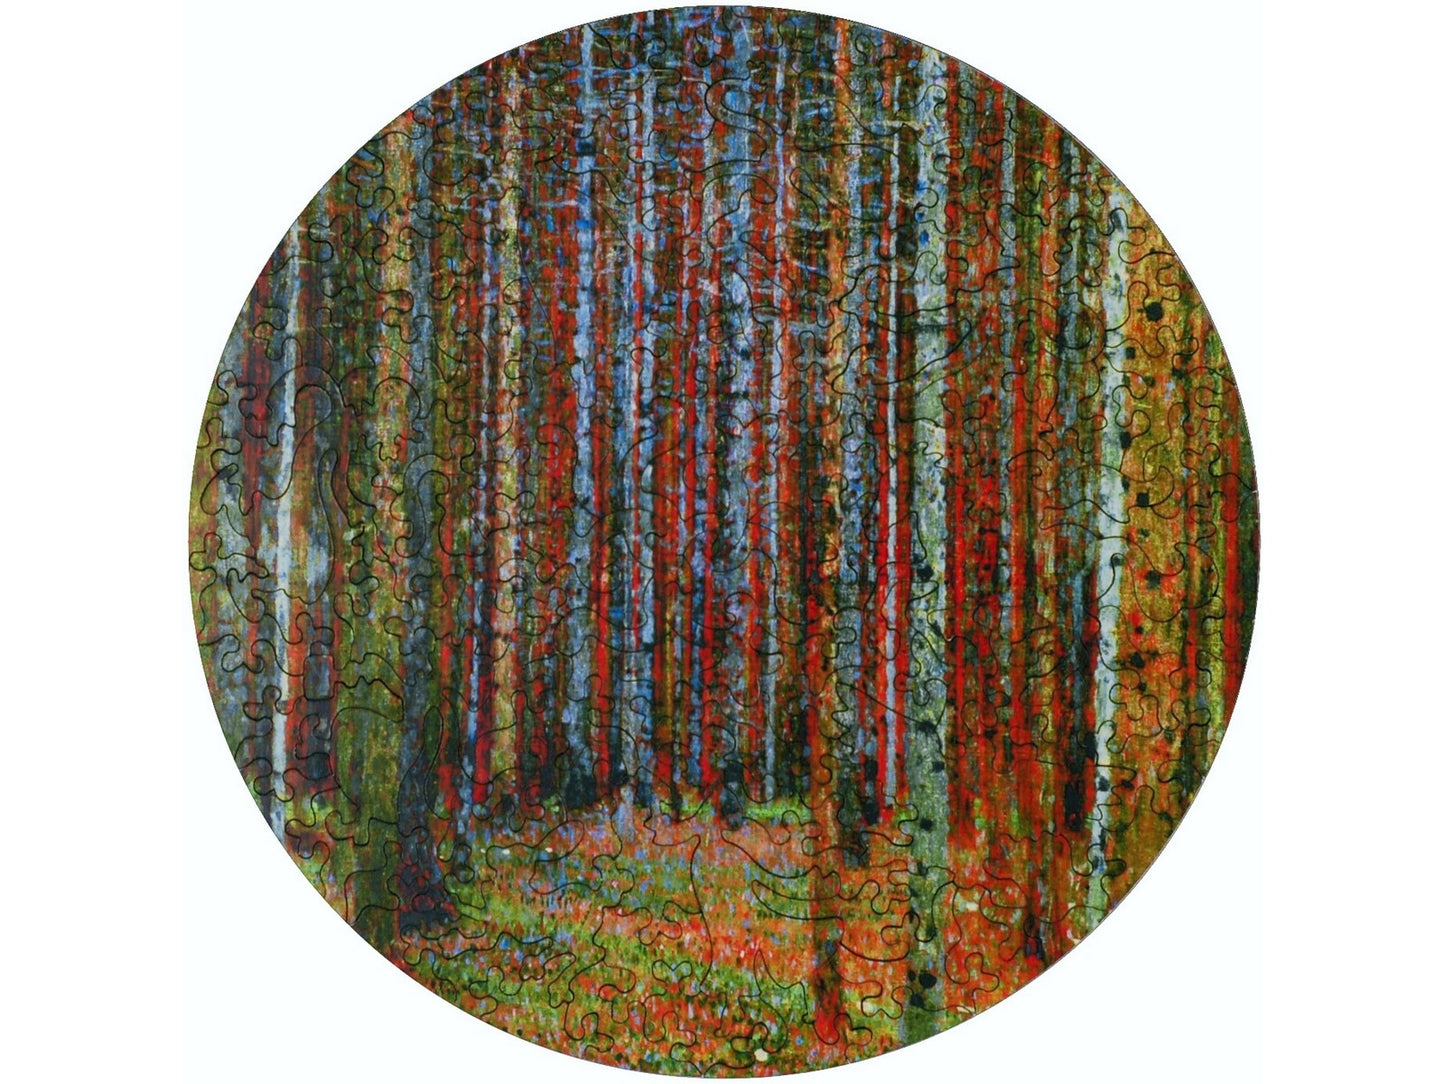 The front of the puzzle, Tannenwald, which shows the trunks of many trees in a forest.